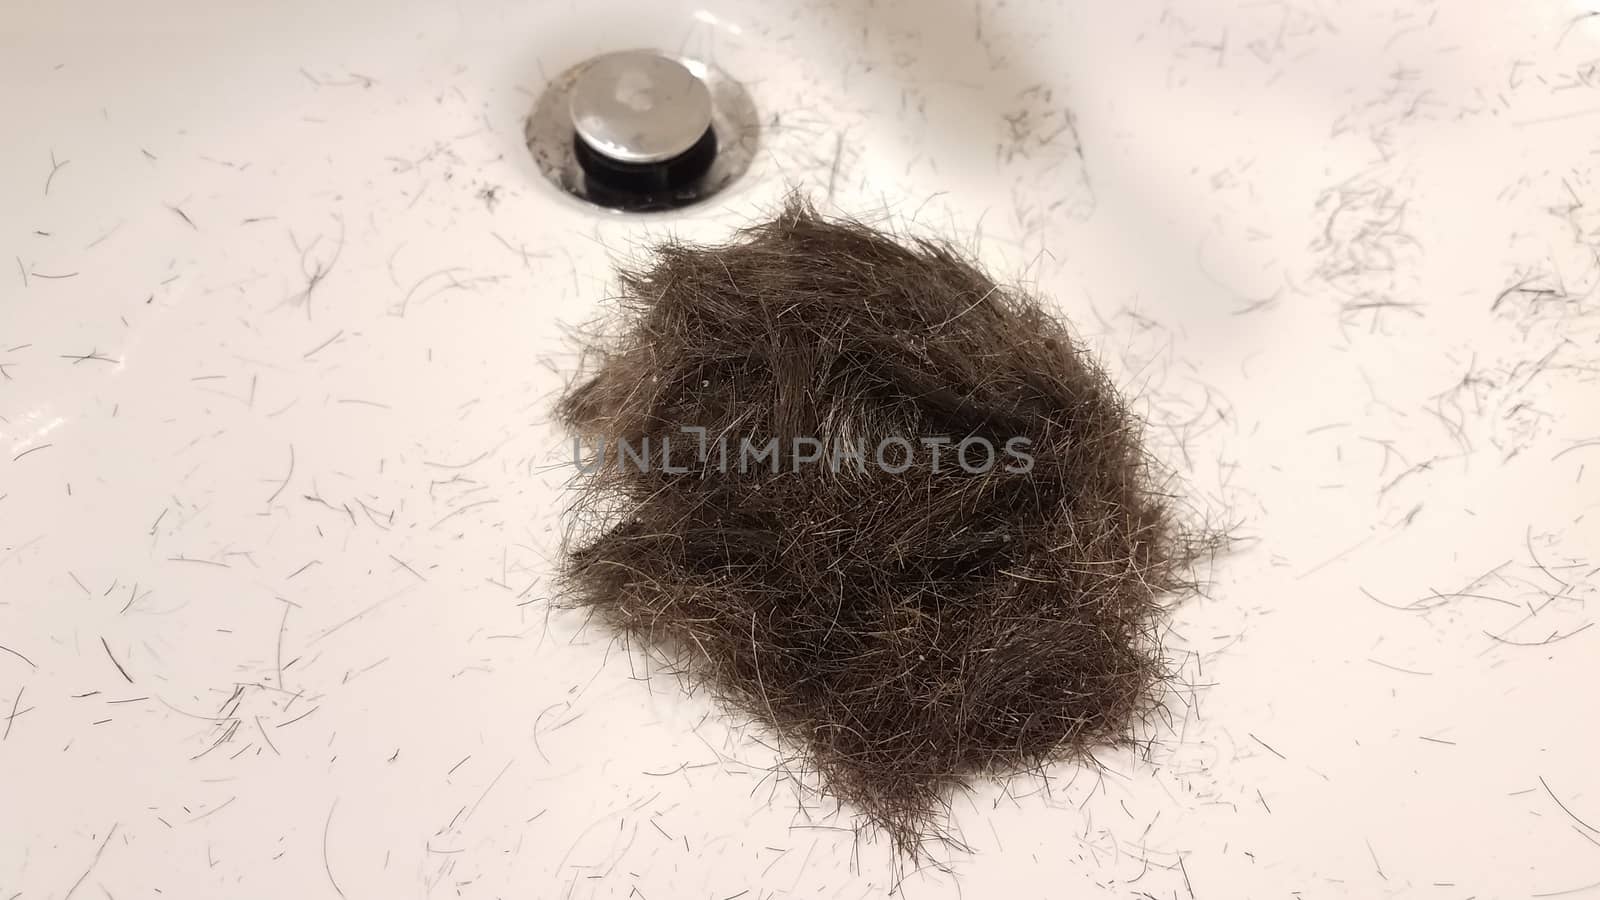 cut brown hair with dandruff in white bathroom sink with drain